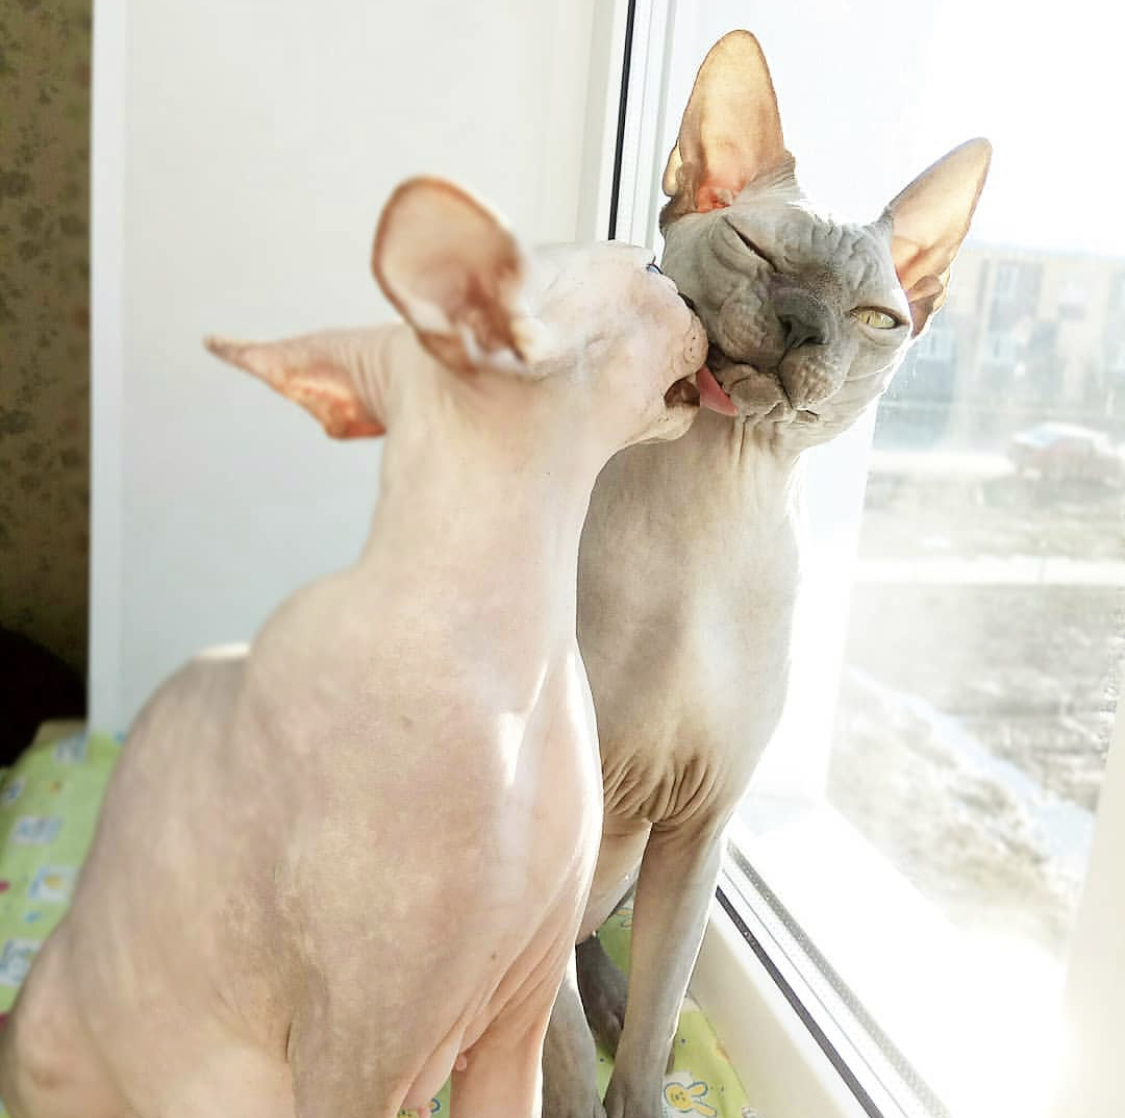 Sphynx cat licking the face of another Sphynx while sitting by the window sill